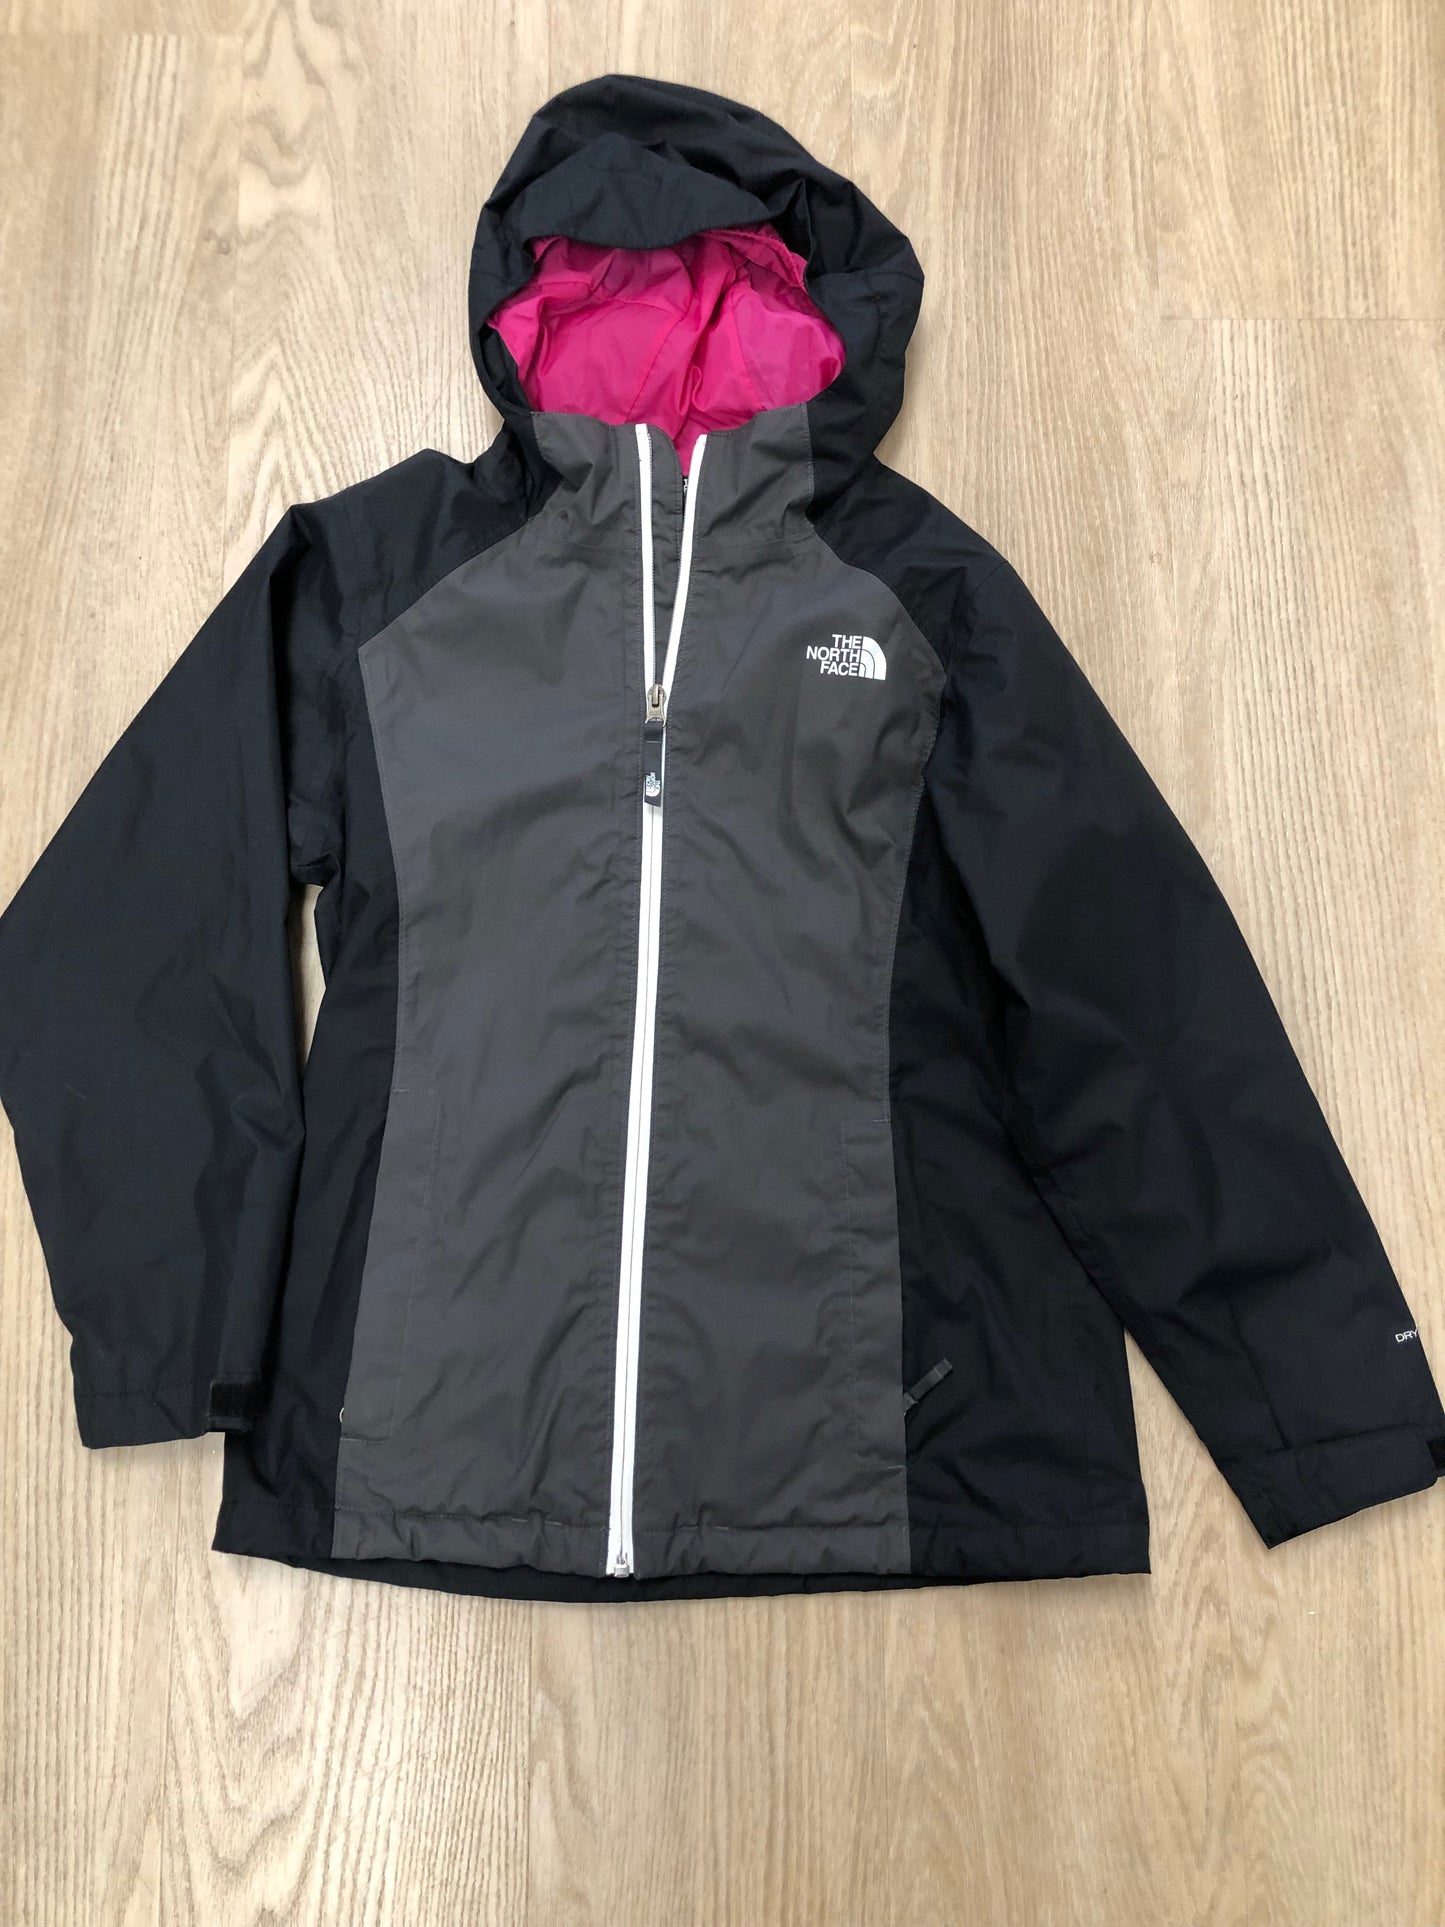 The North Face Child Size 14 Black color block Jacket